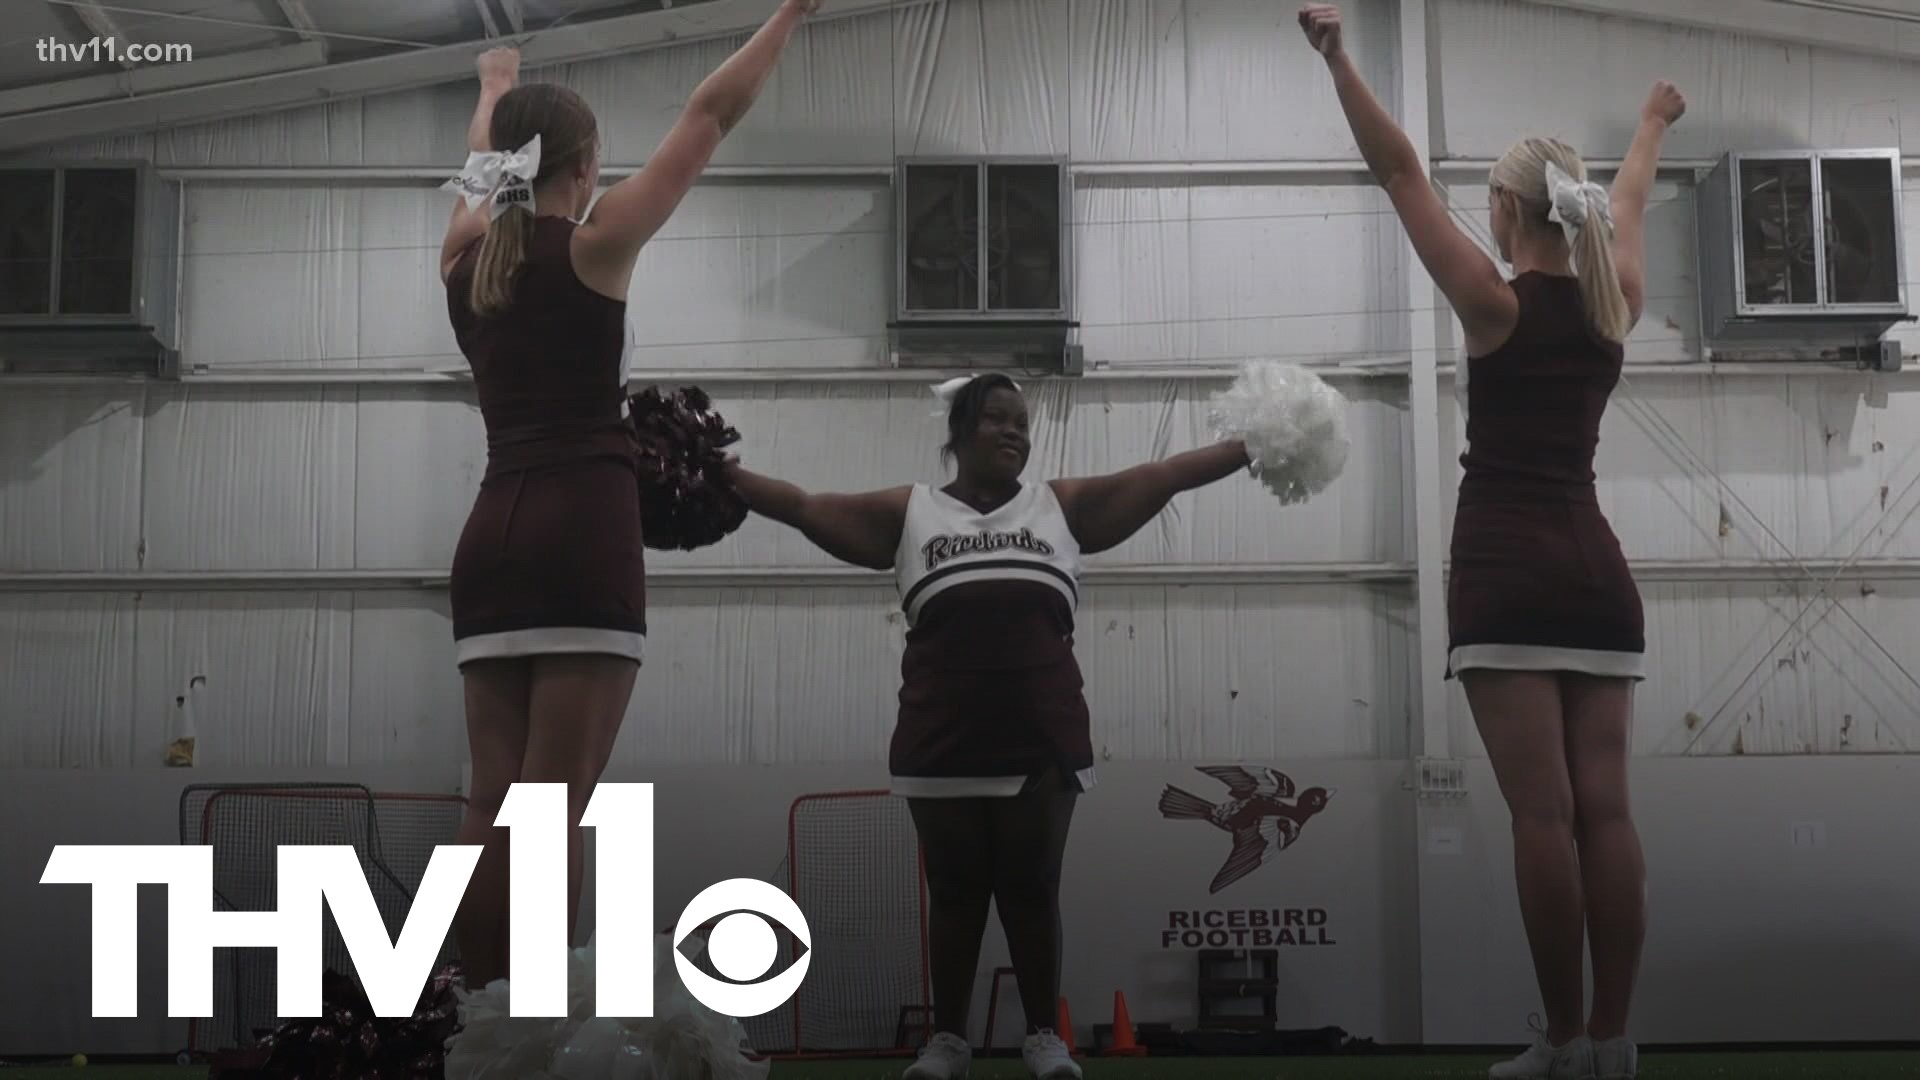 A 10th grader in Stuttgart became the first varsity cheerleader with special needs in the school's history, opening doors for many others.